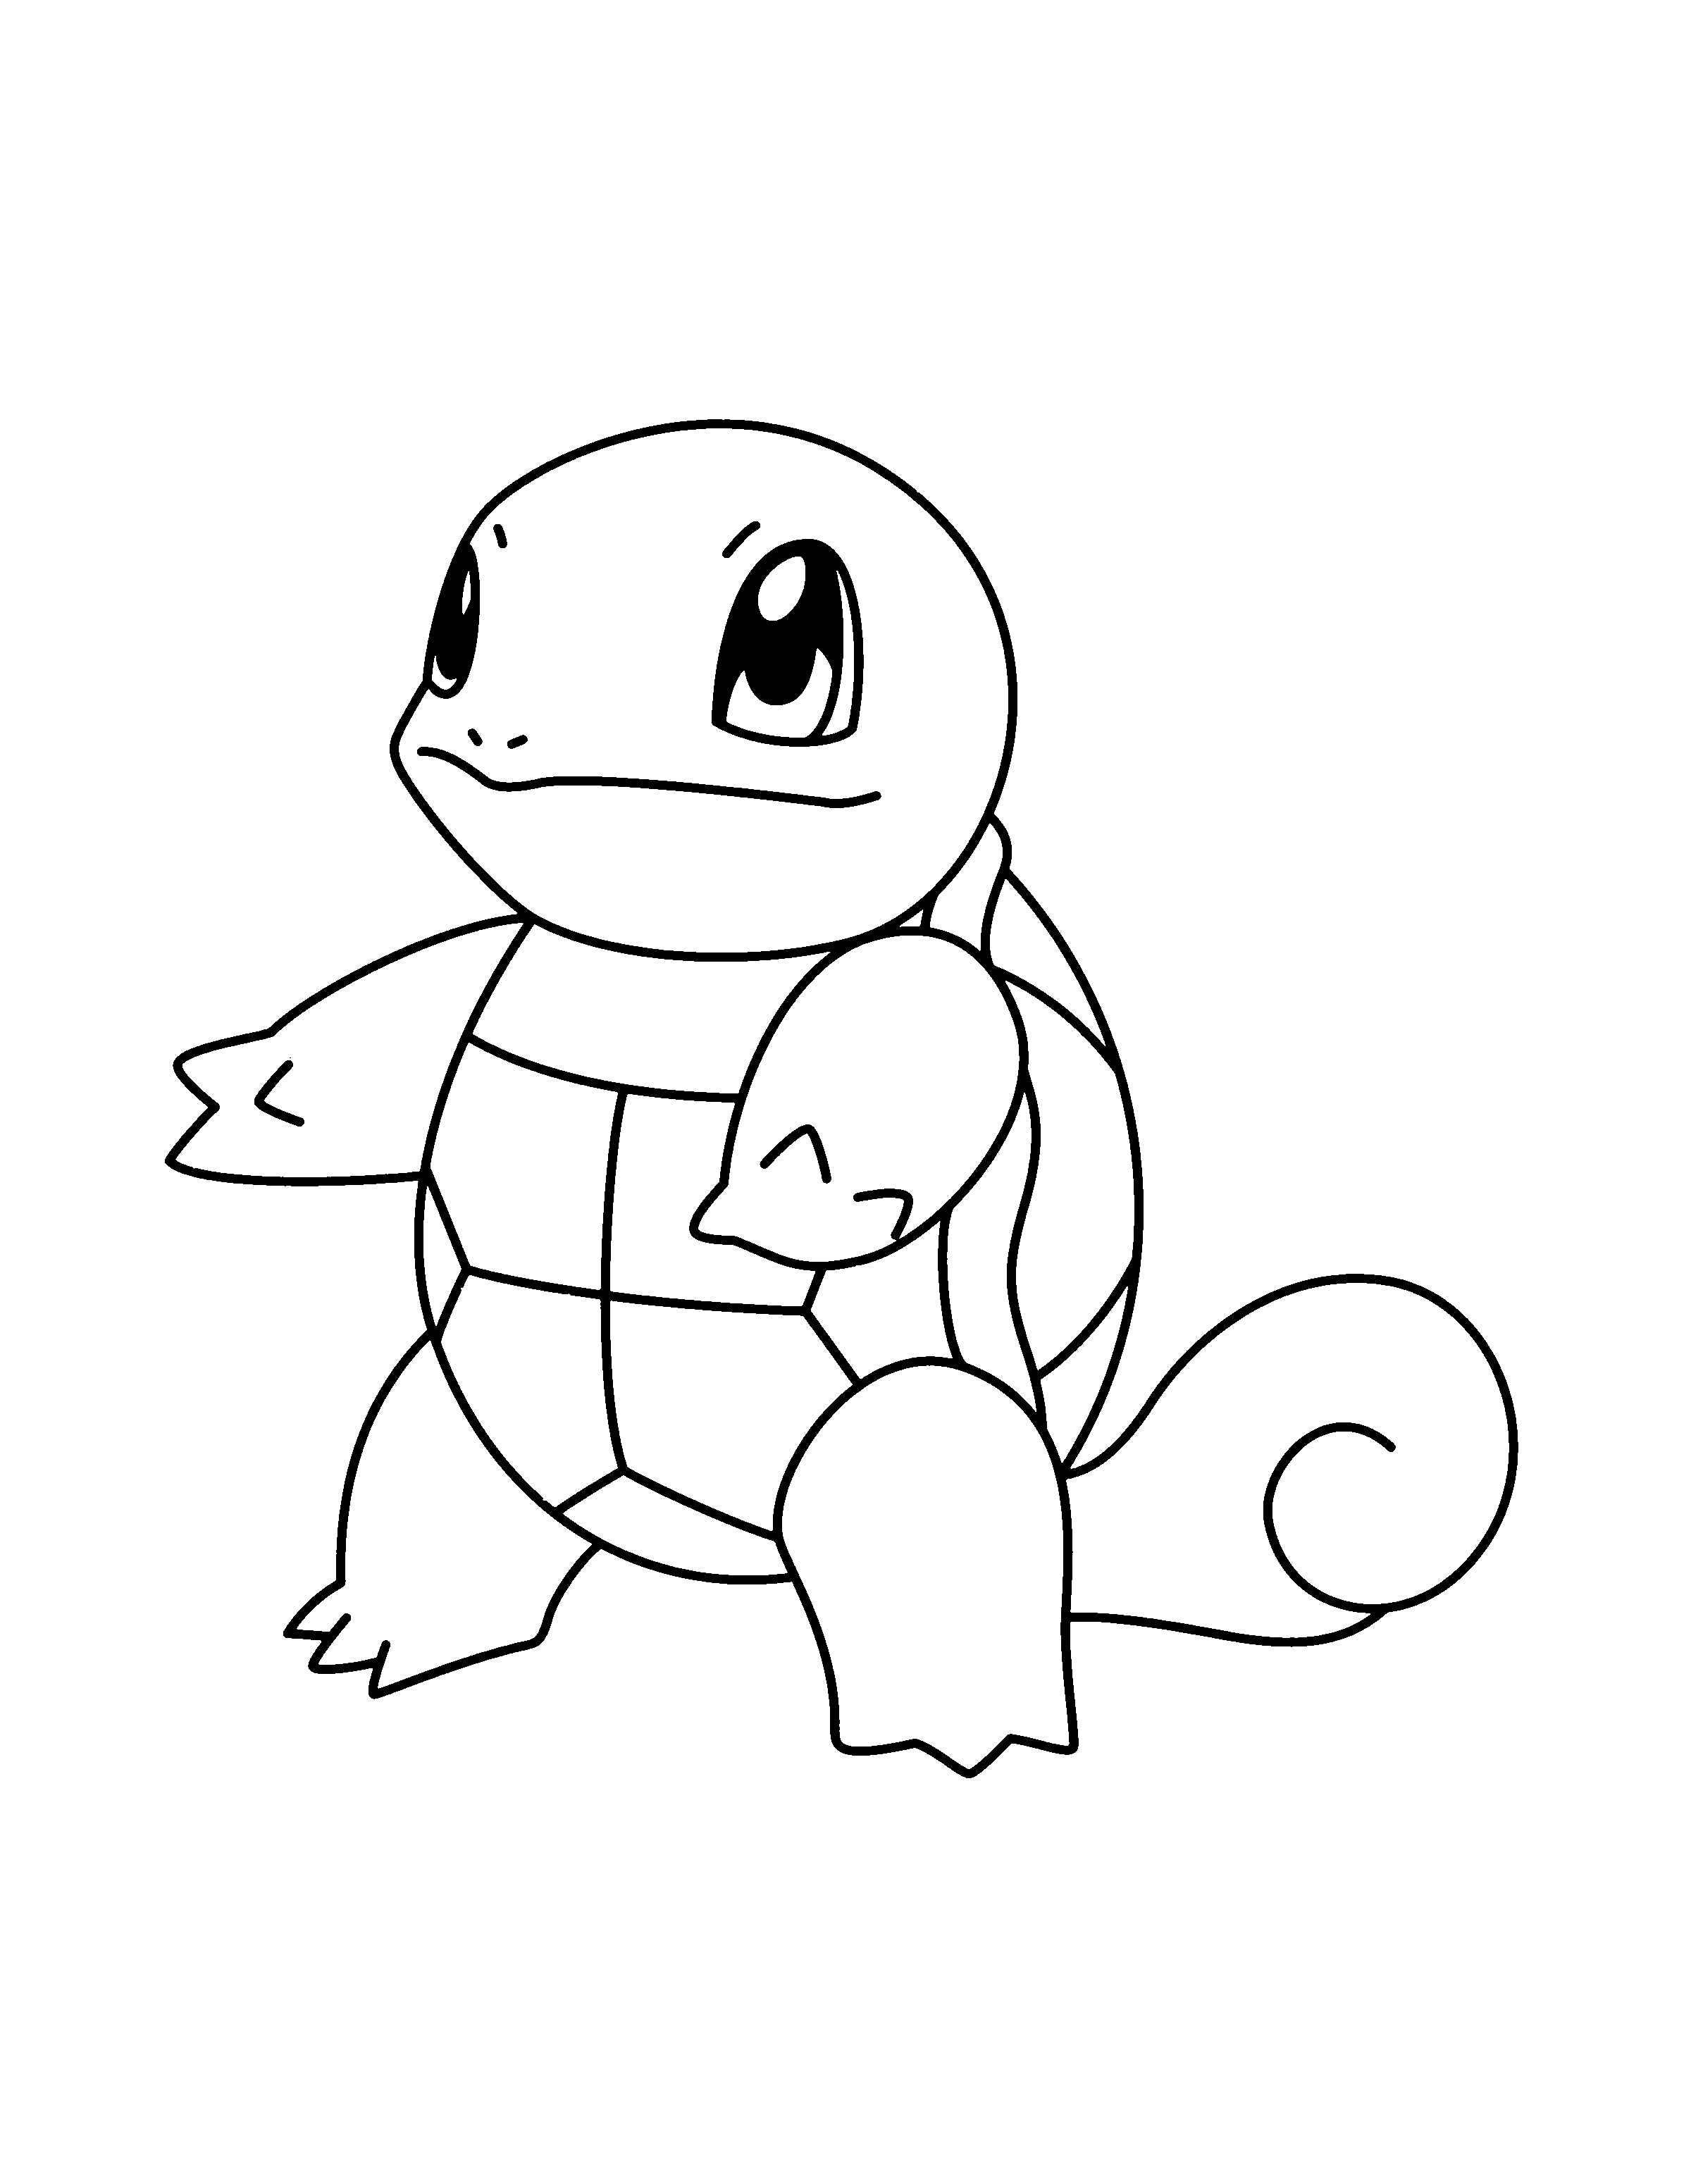 Coloring Page Pokemon Advanced Coloring Pages 160 Pokemon Coloring Pages Pokemon Deca